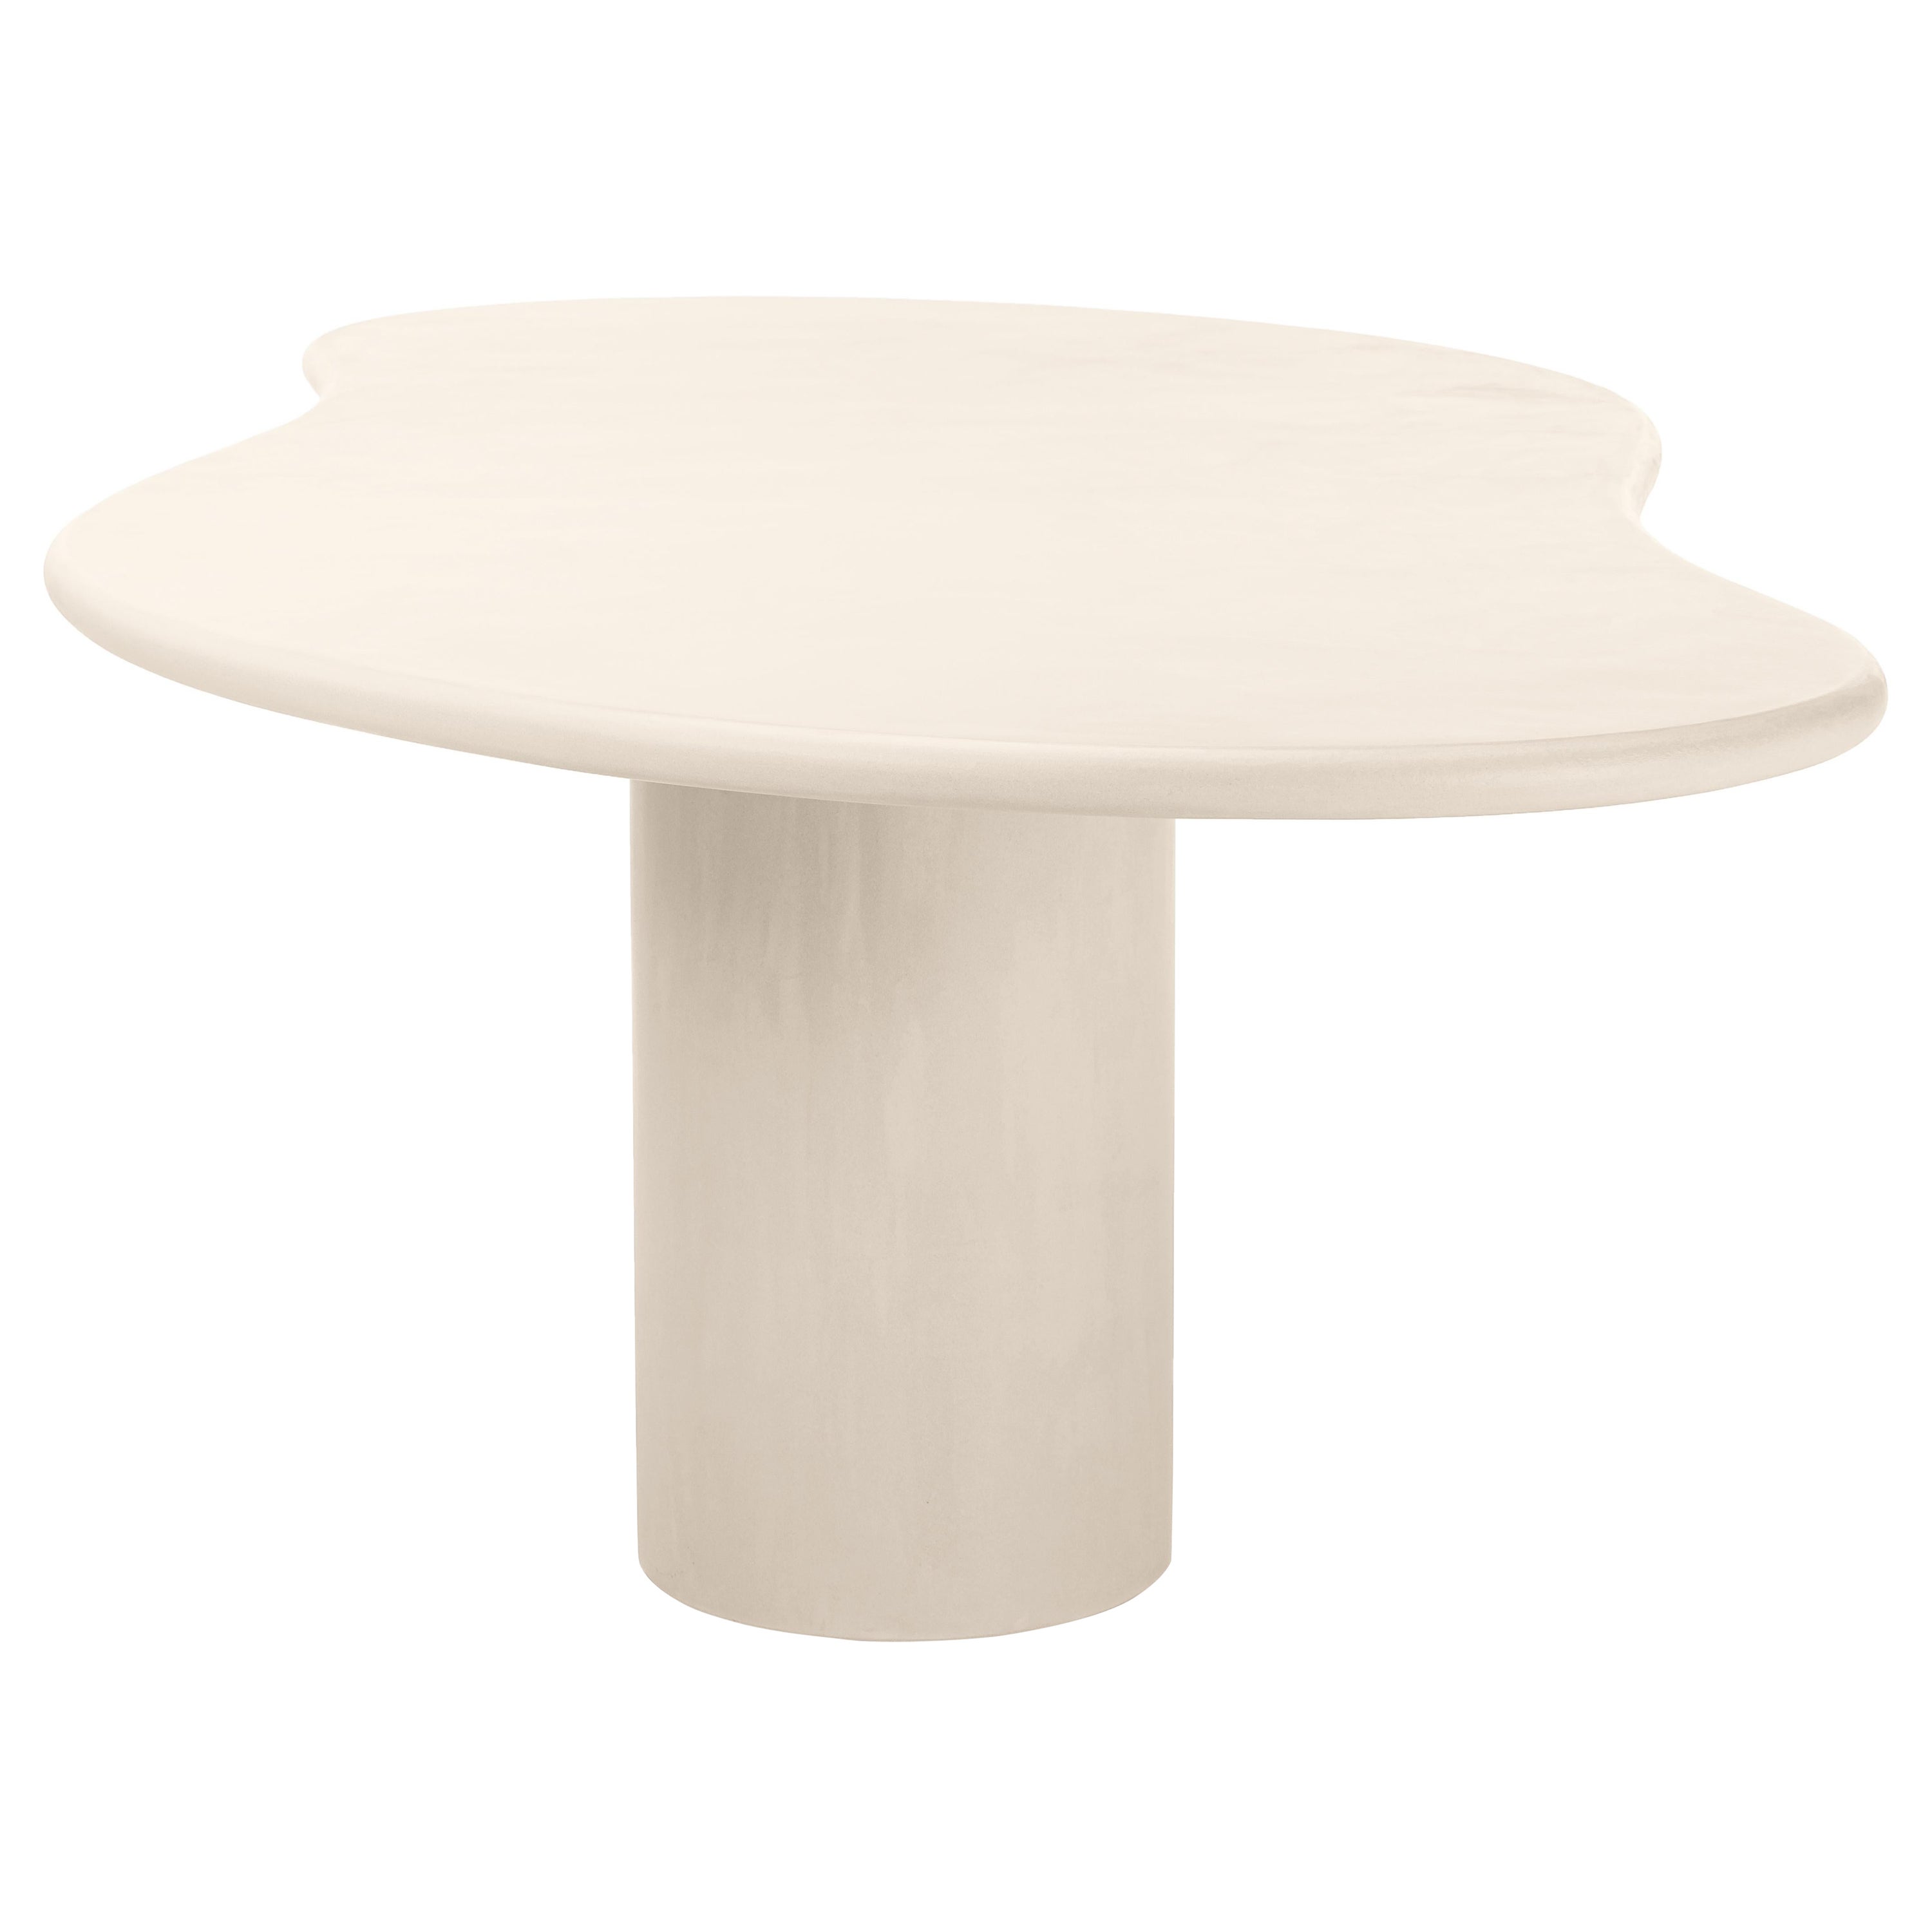 Contemporary Organic Natural Plaster "Latus" Table 320cm by Isabelle Beaumont For Sale